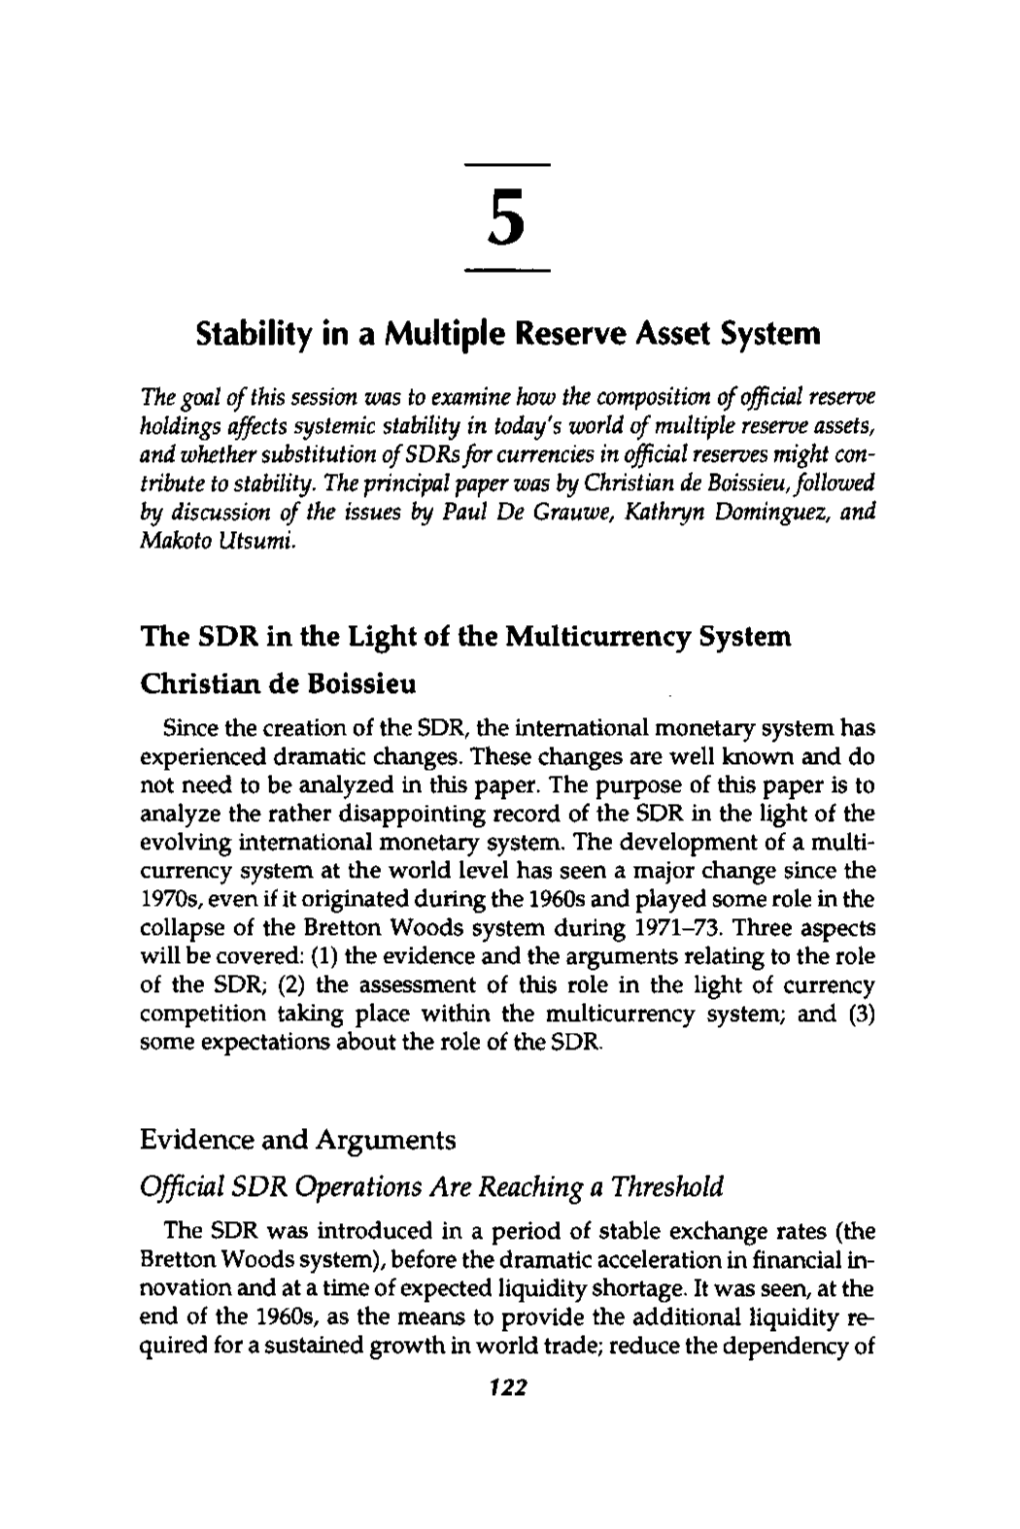 Stability in a Multiple Reserve Asset System